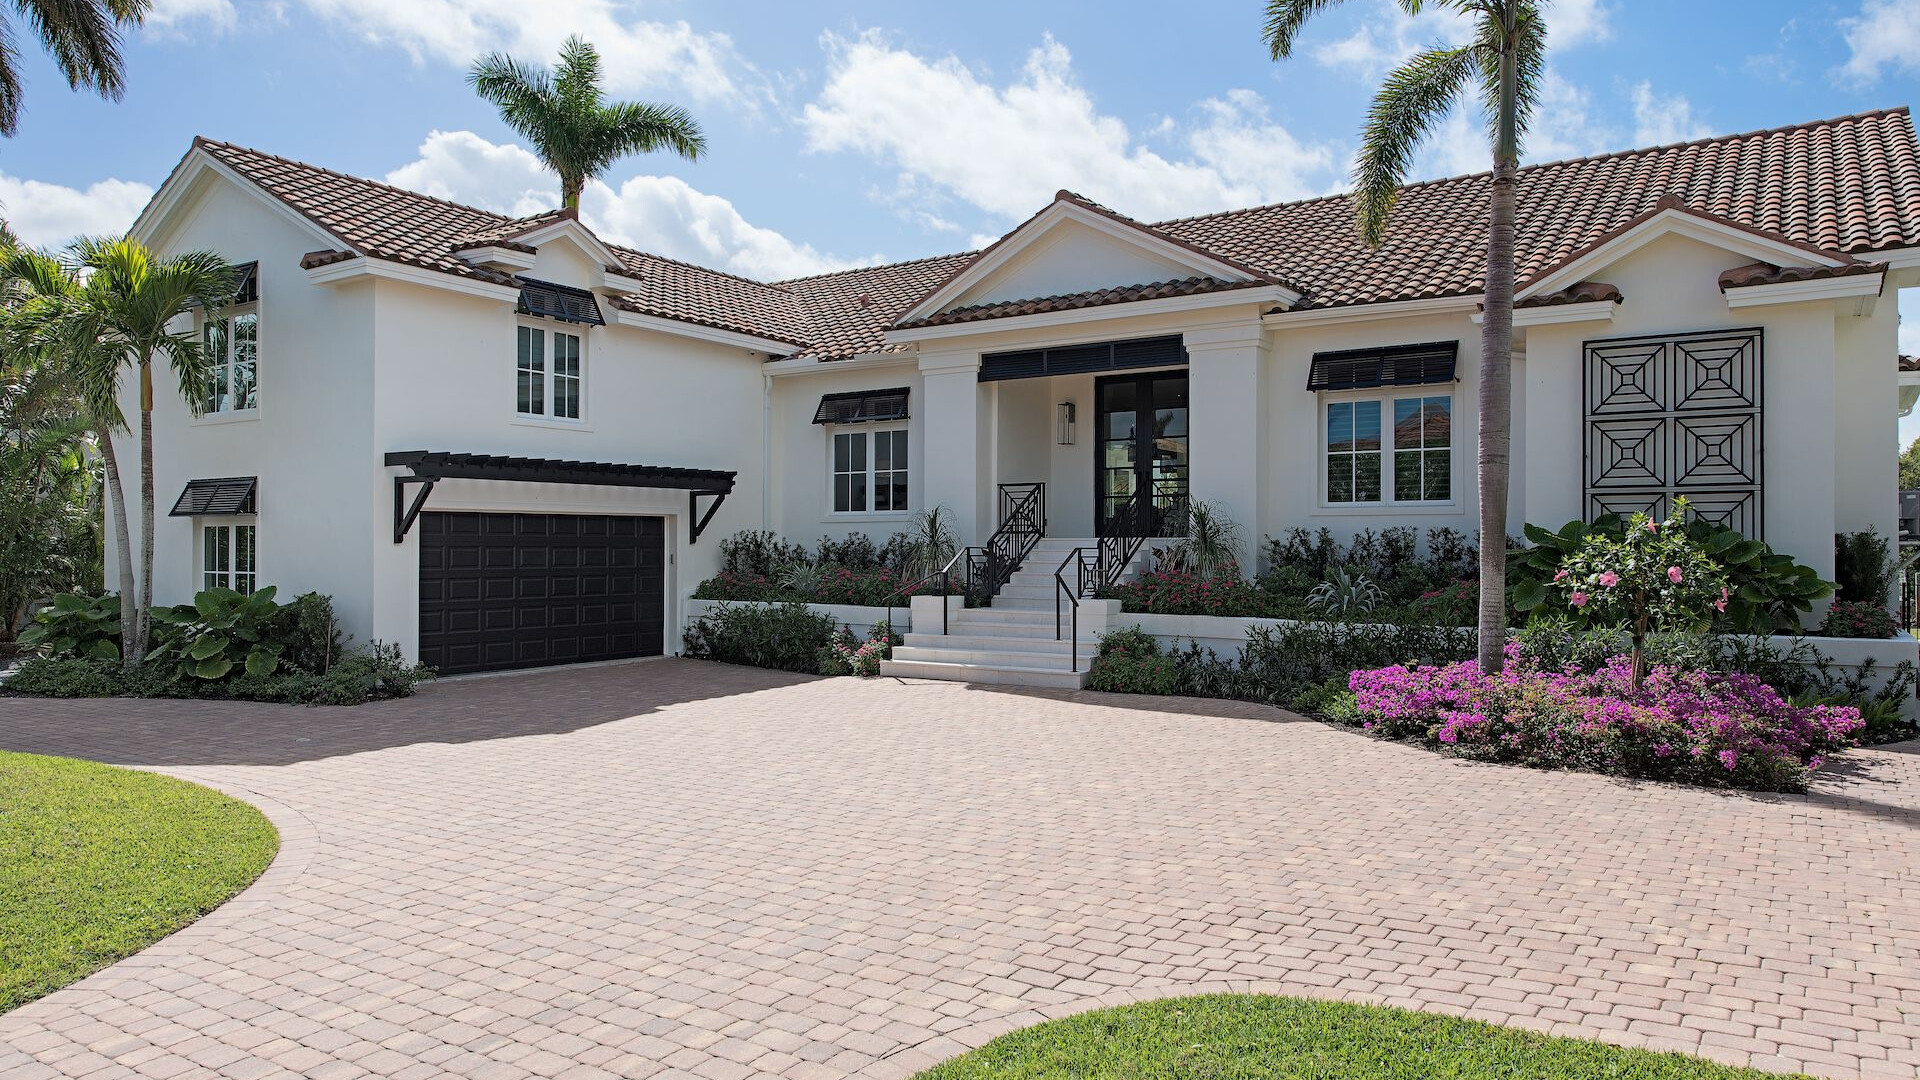 Front view of classic contemporary custom home, Naples FL